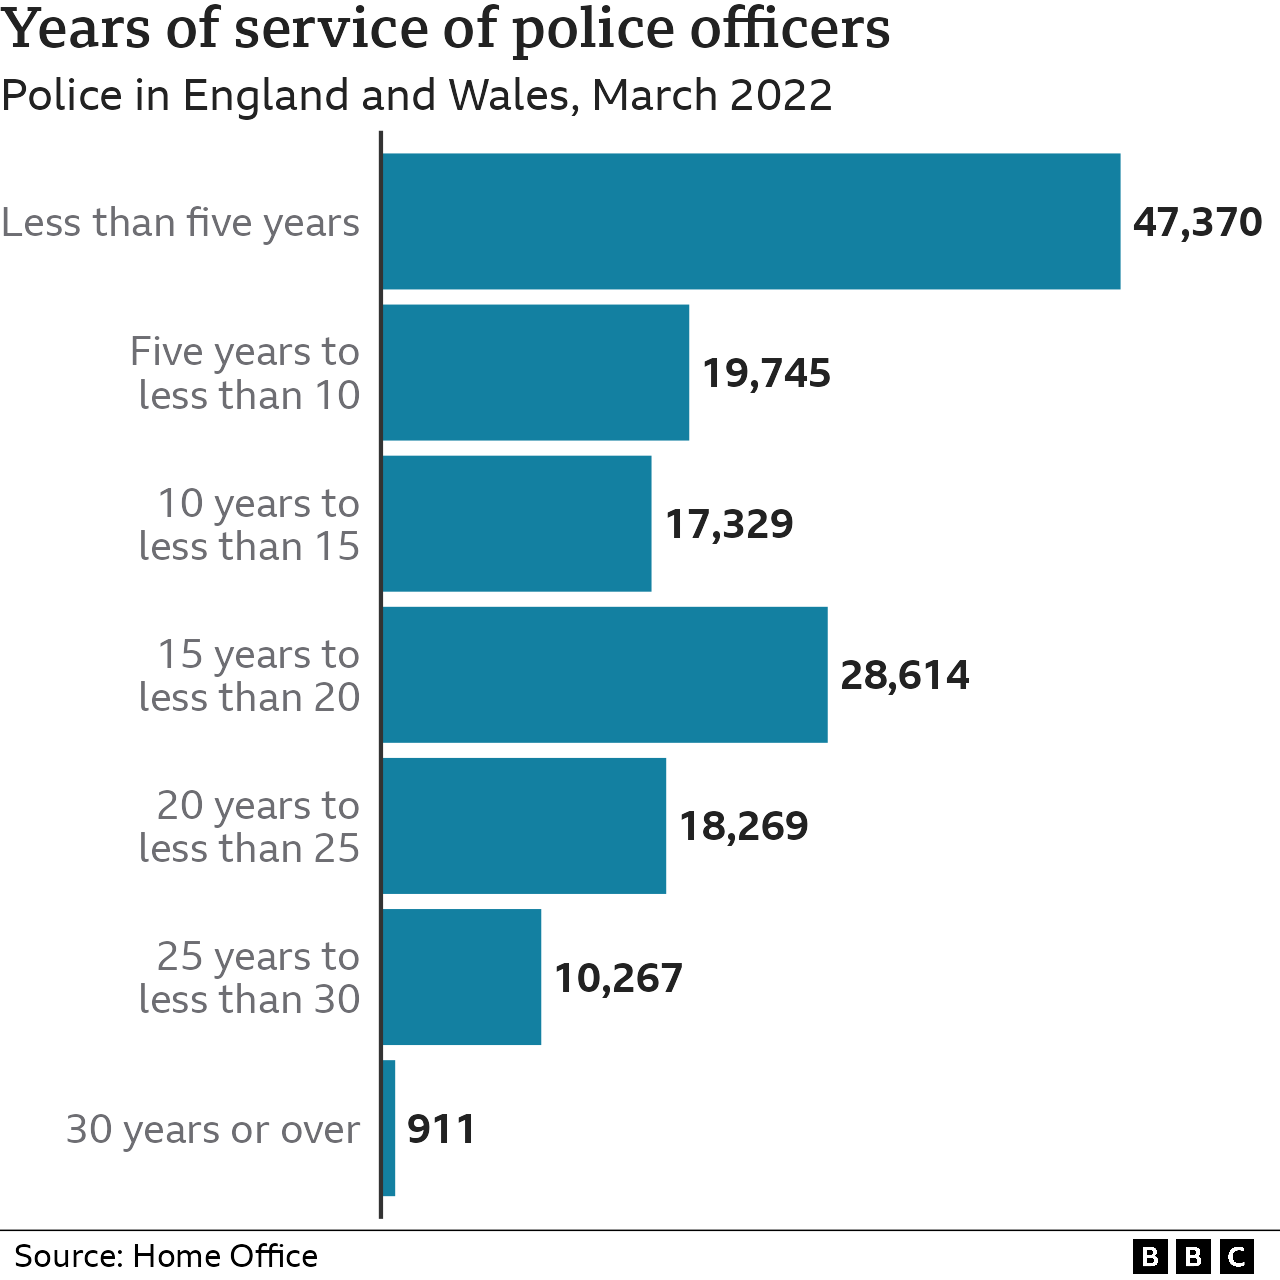 Bar chart showing the years of service of police officers in England and Wales as at March 2022 - the largest group served less than five years